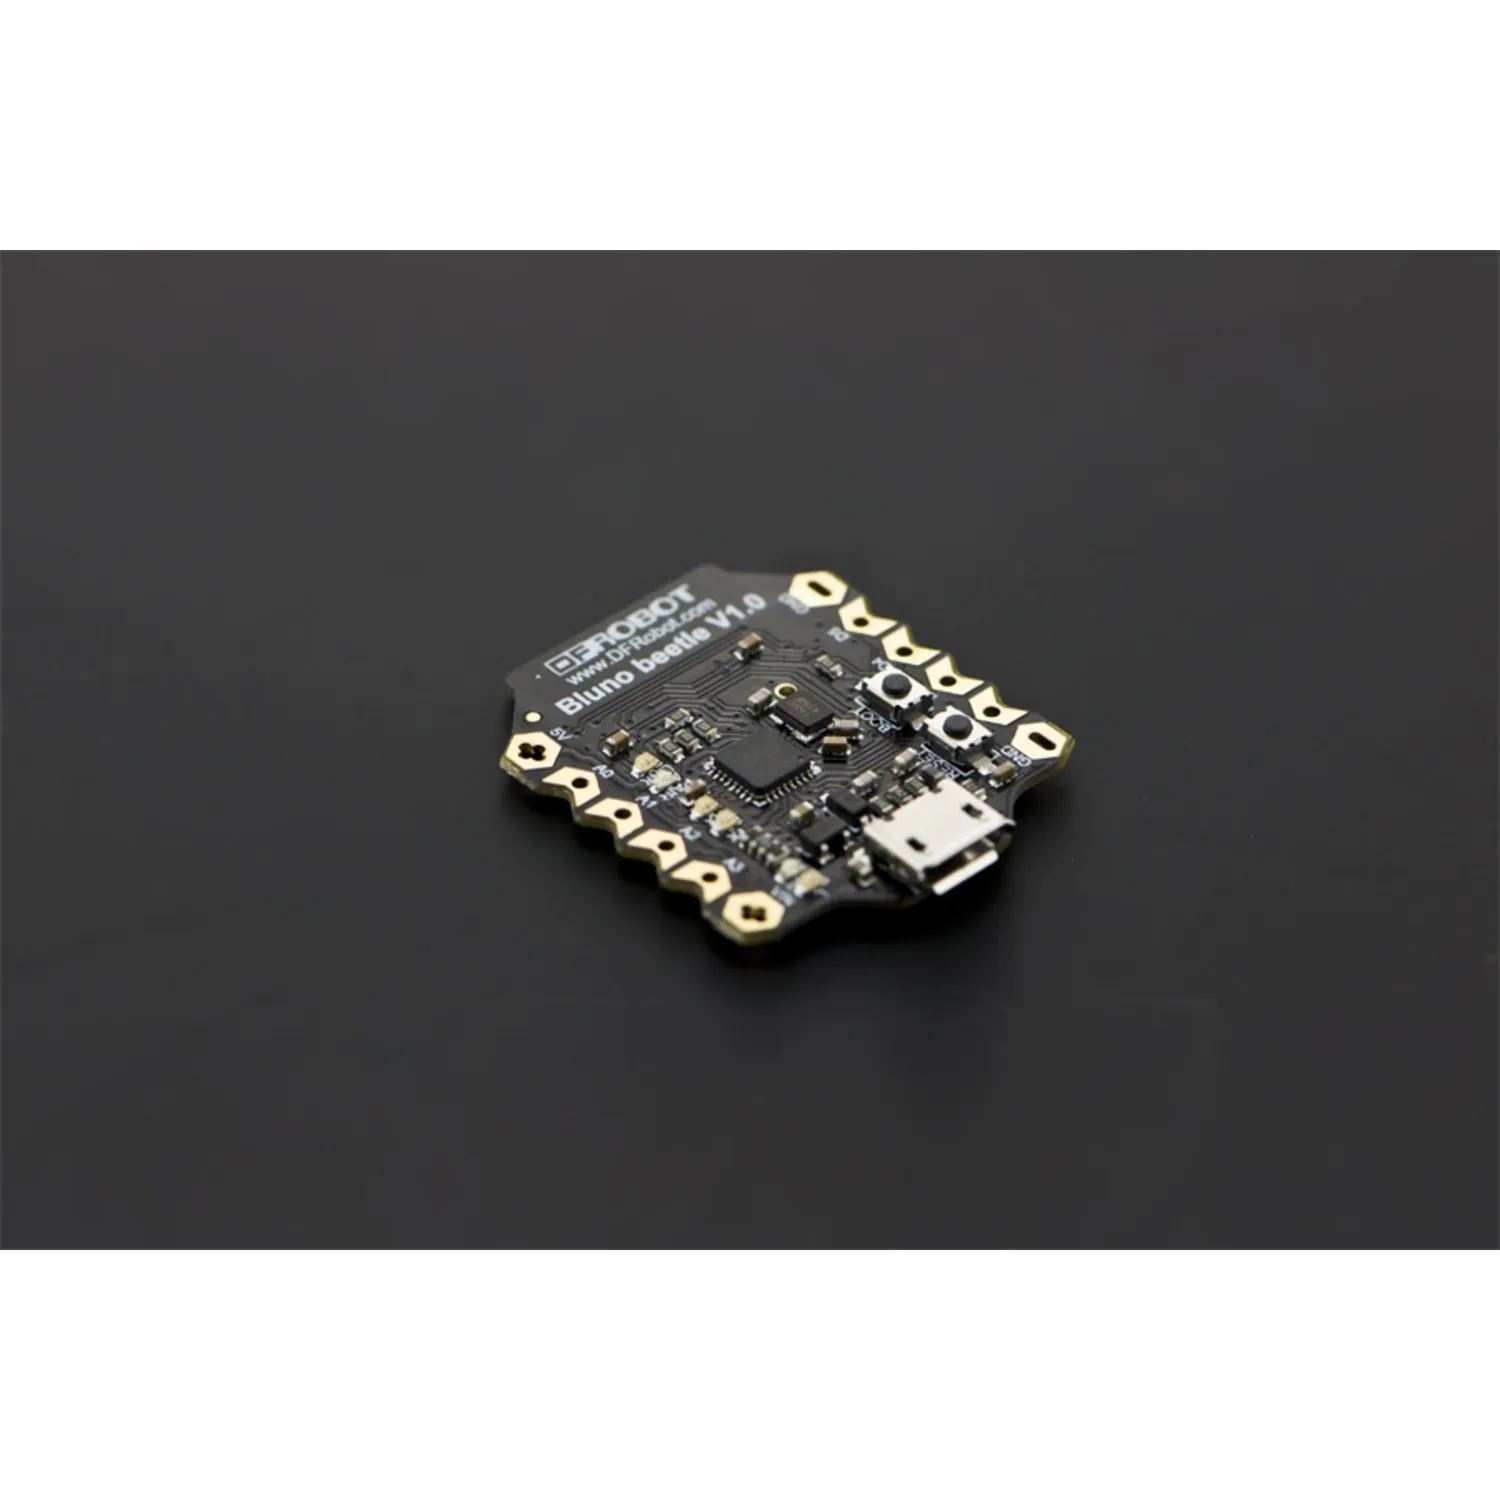 Photo of Beetle BLE - The smallest Arduino bluetooth 4.0 (BLE)